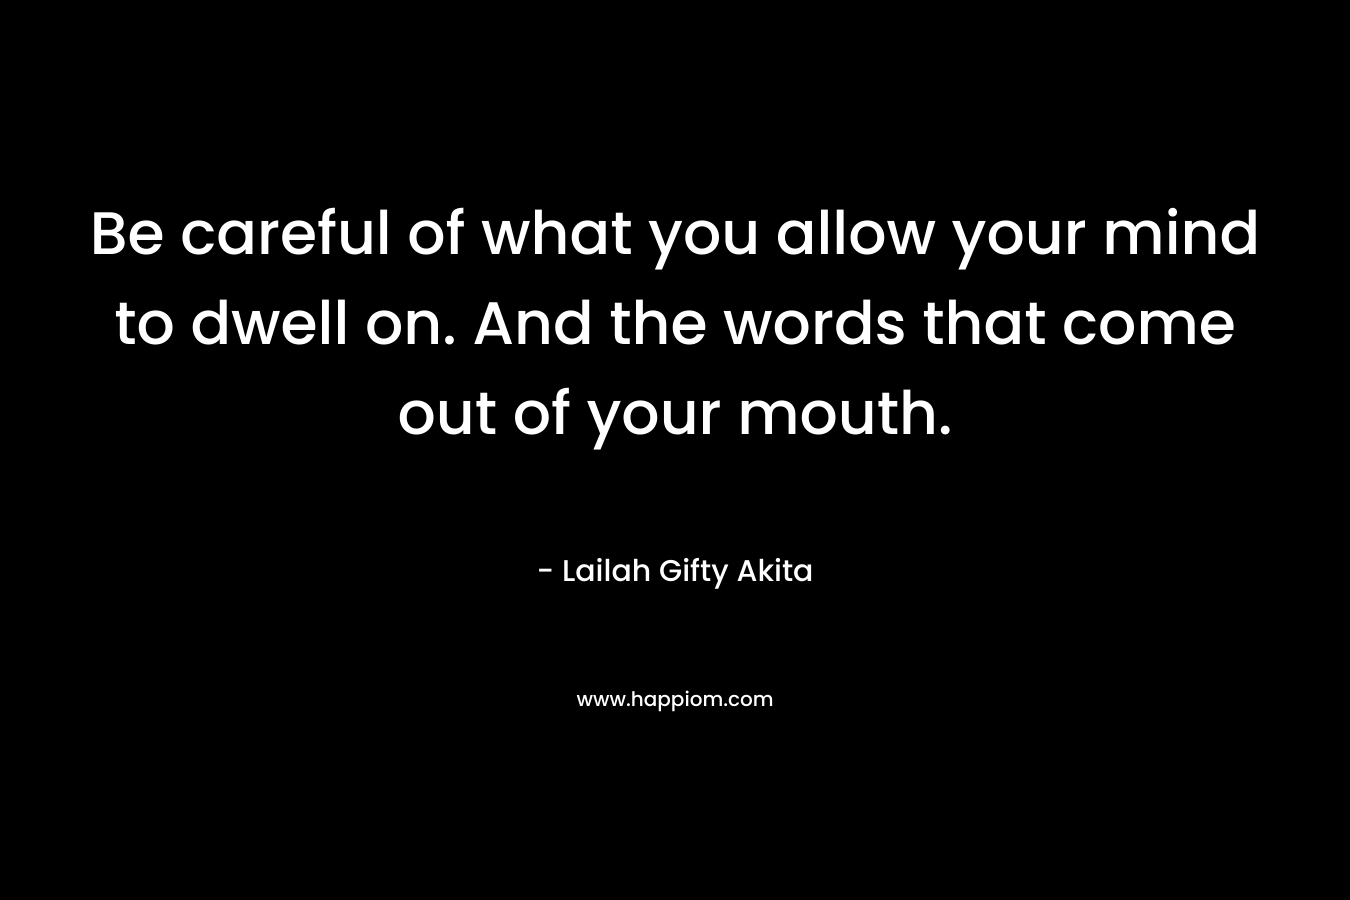 Be careful of what you allow your mind to dwell on. And the words that come out of your mouth. – Lailah Gifty Akita